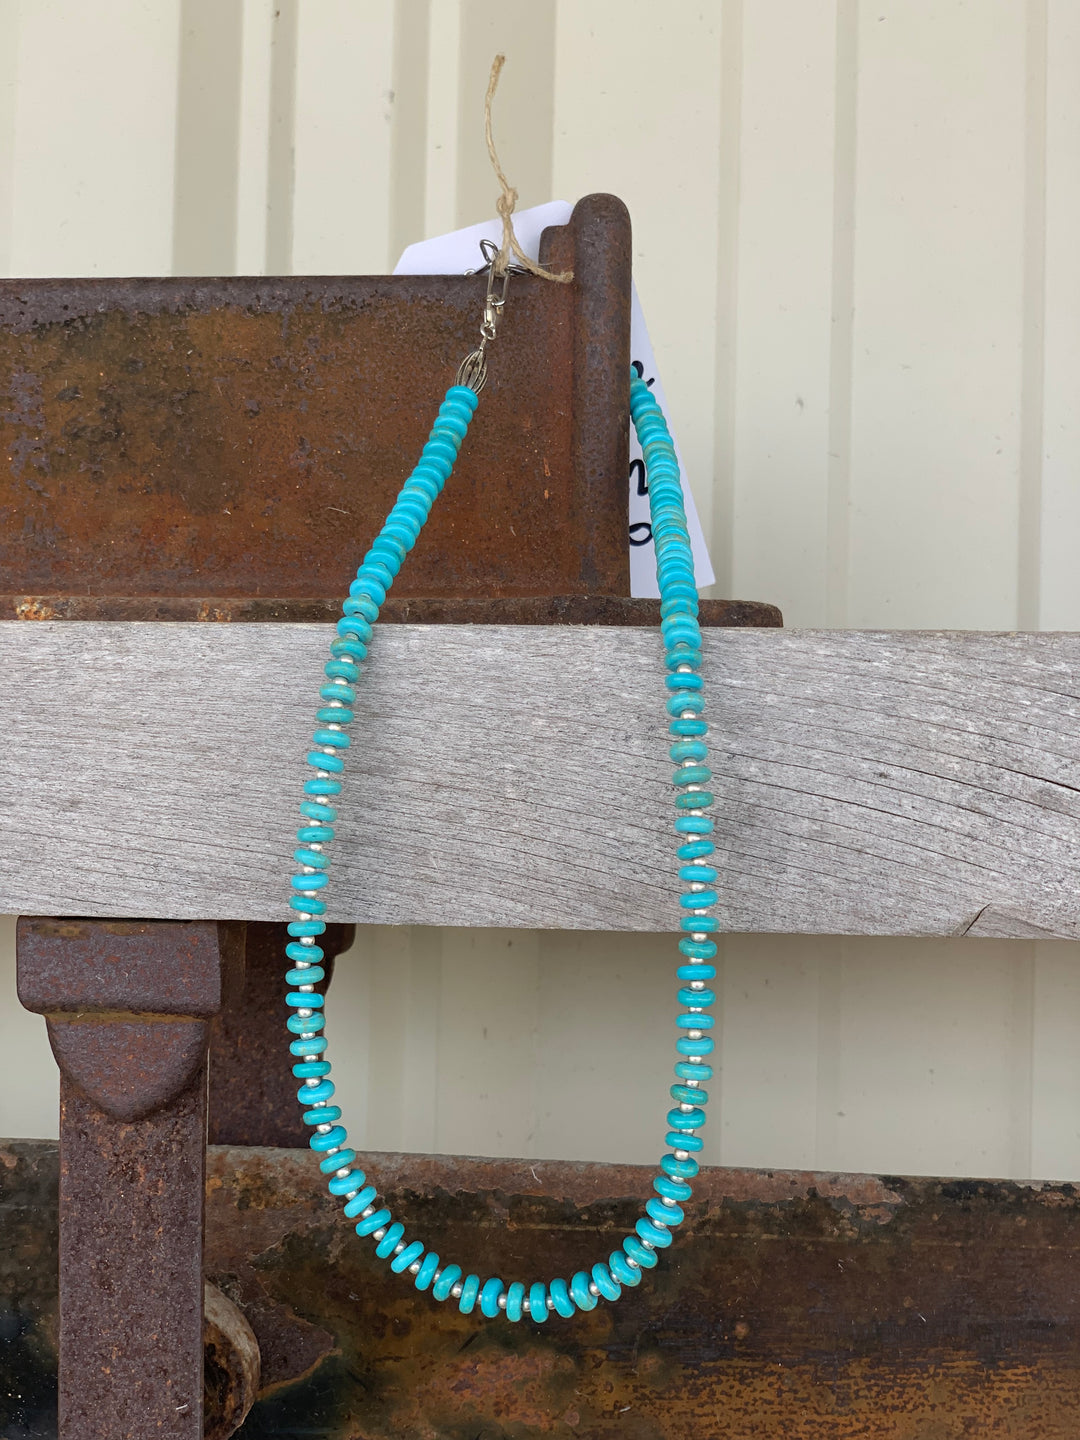 16” Necklace. Round Turquoise Wheels with Small Sterling Silver Beads.